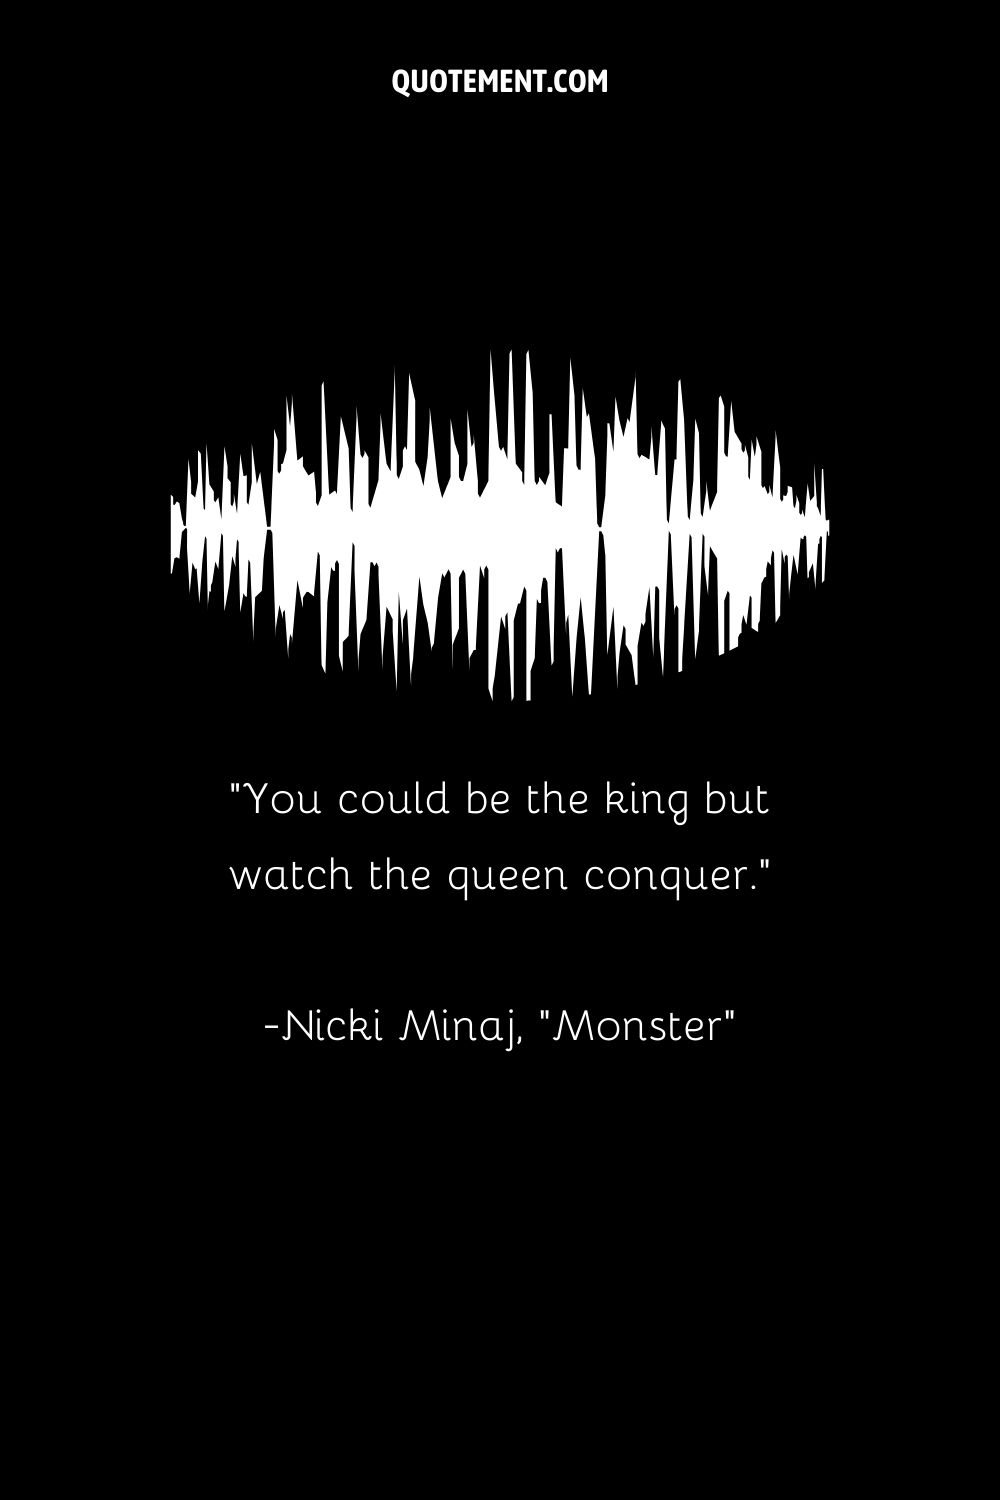 You could be the king but watch the queen conquer. — Nicki Minaj, Monster